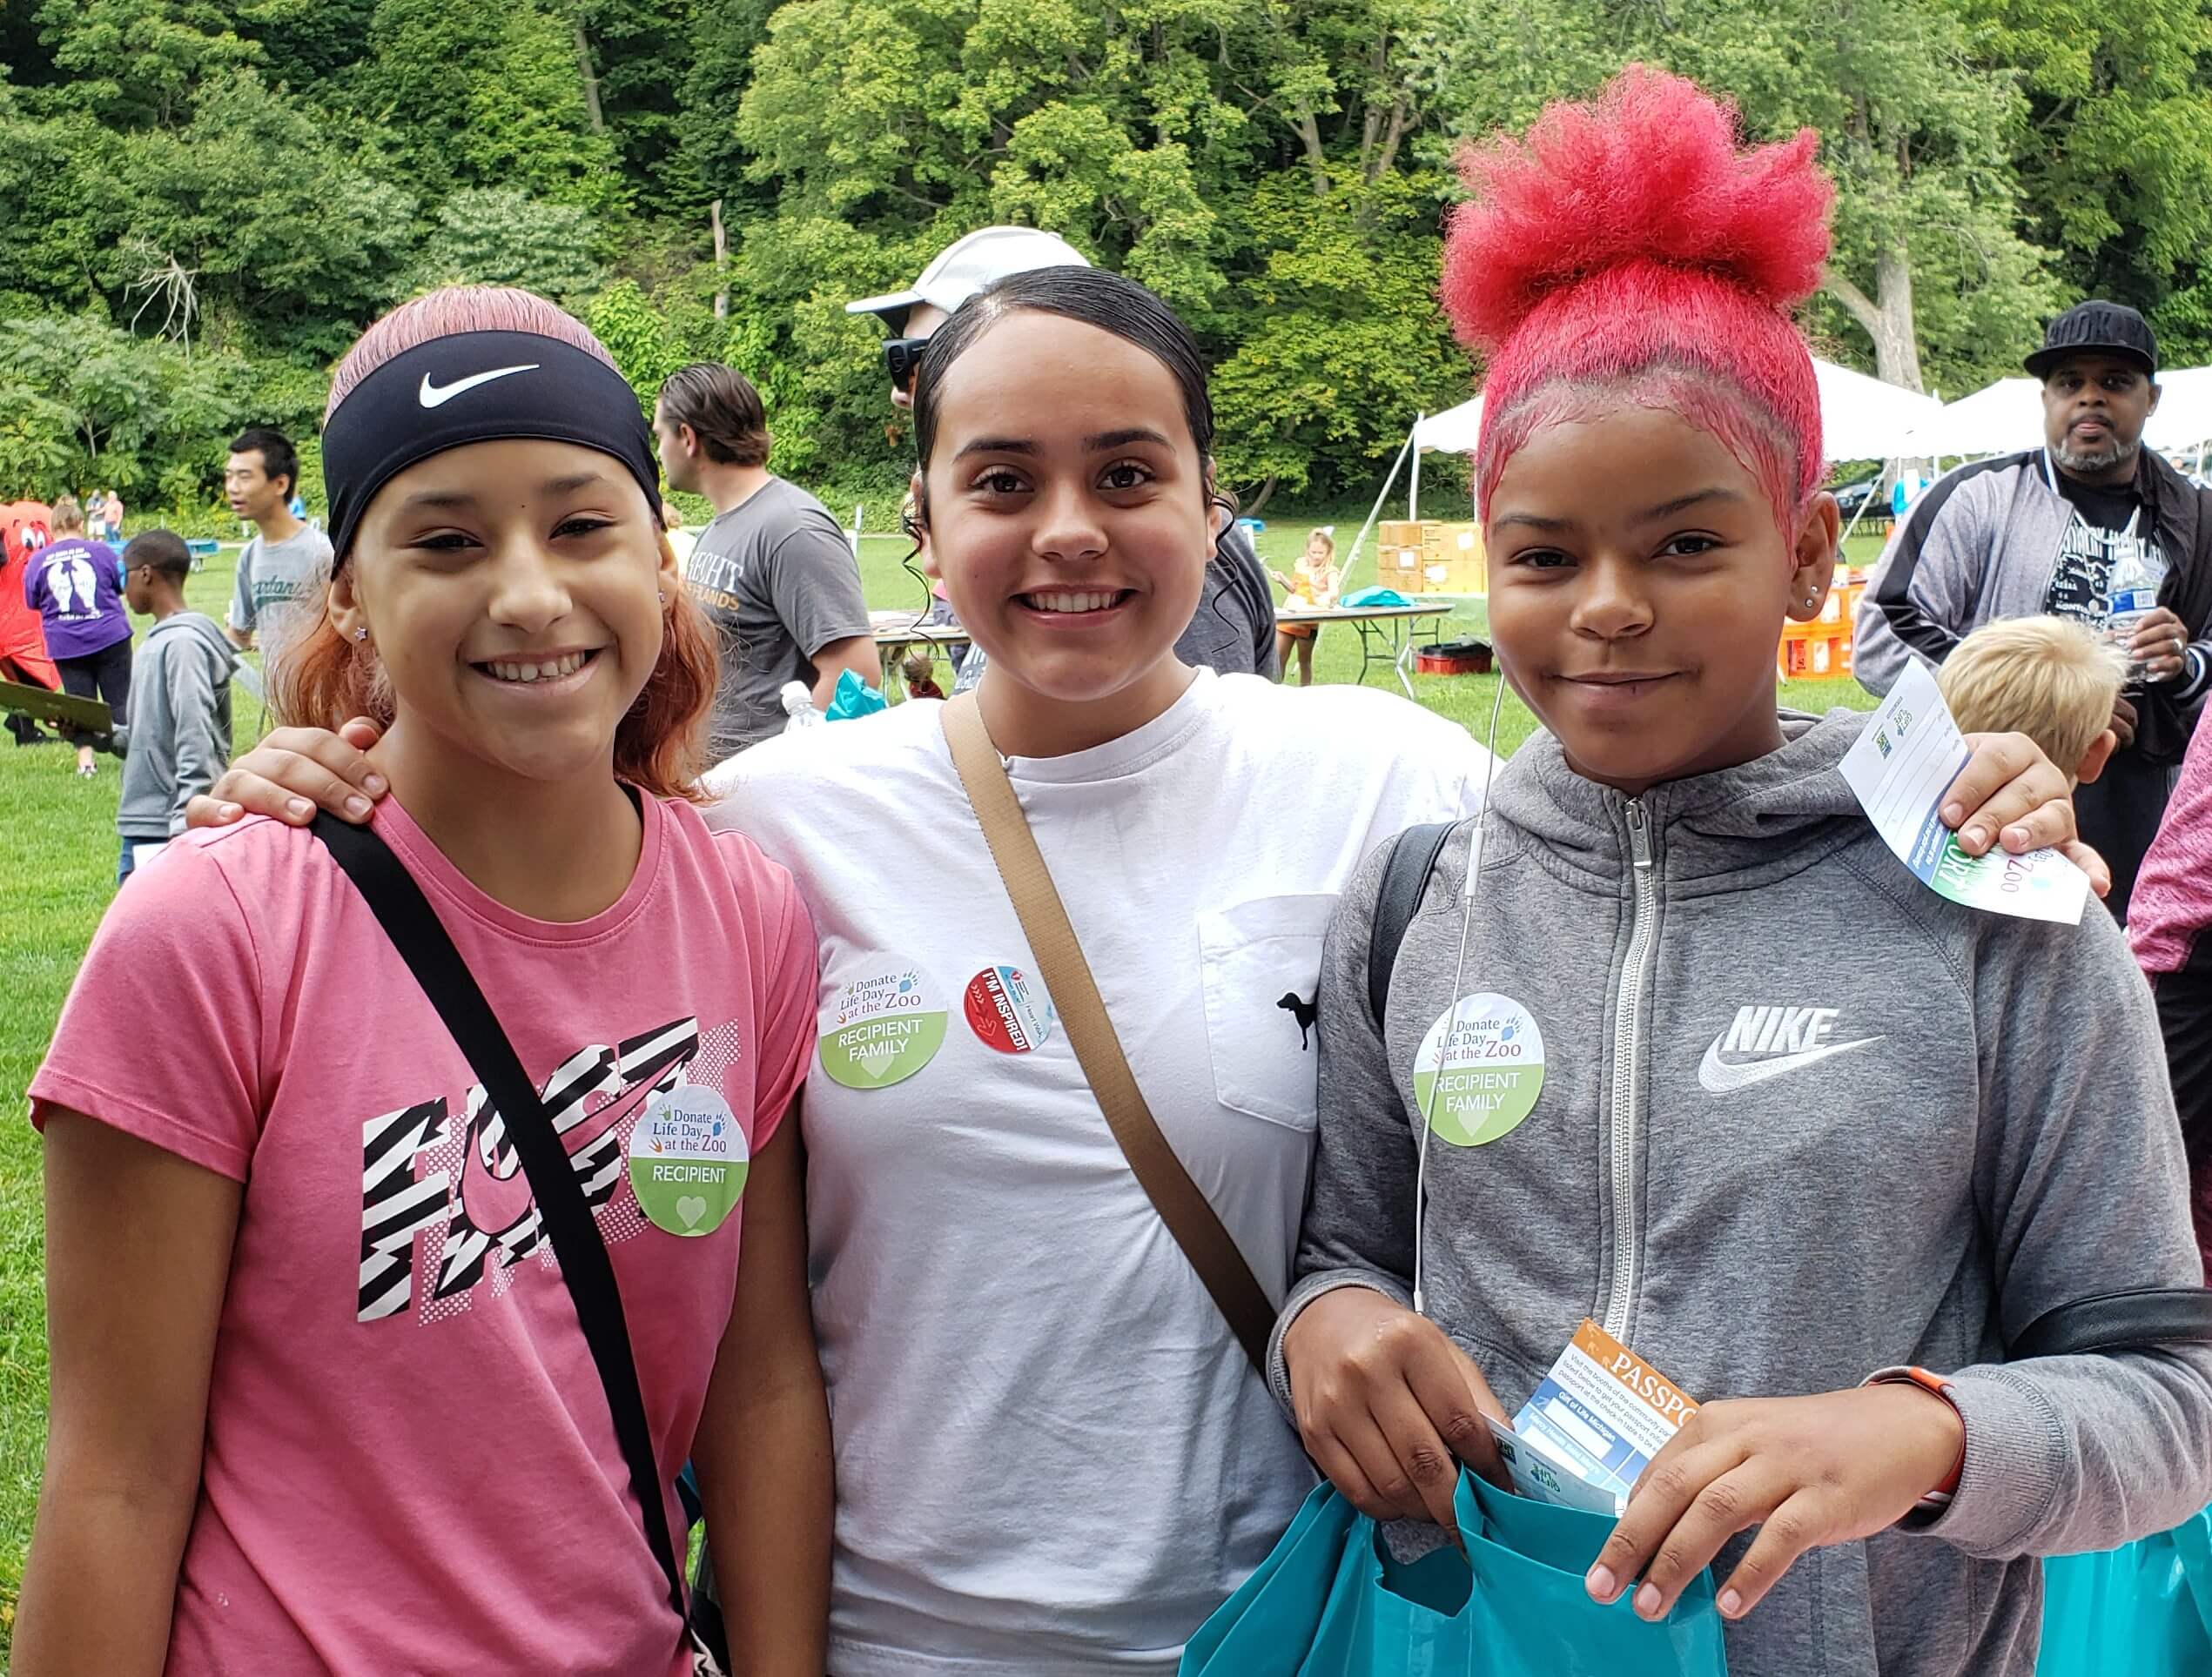 Three young teen girls wearing stickers that identify one as a transplant recipient and the others as family members